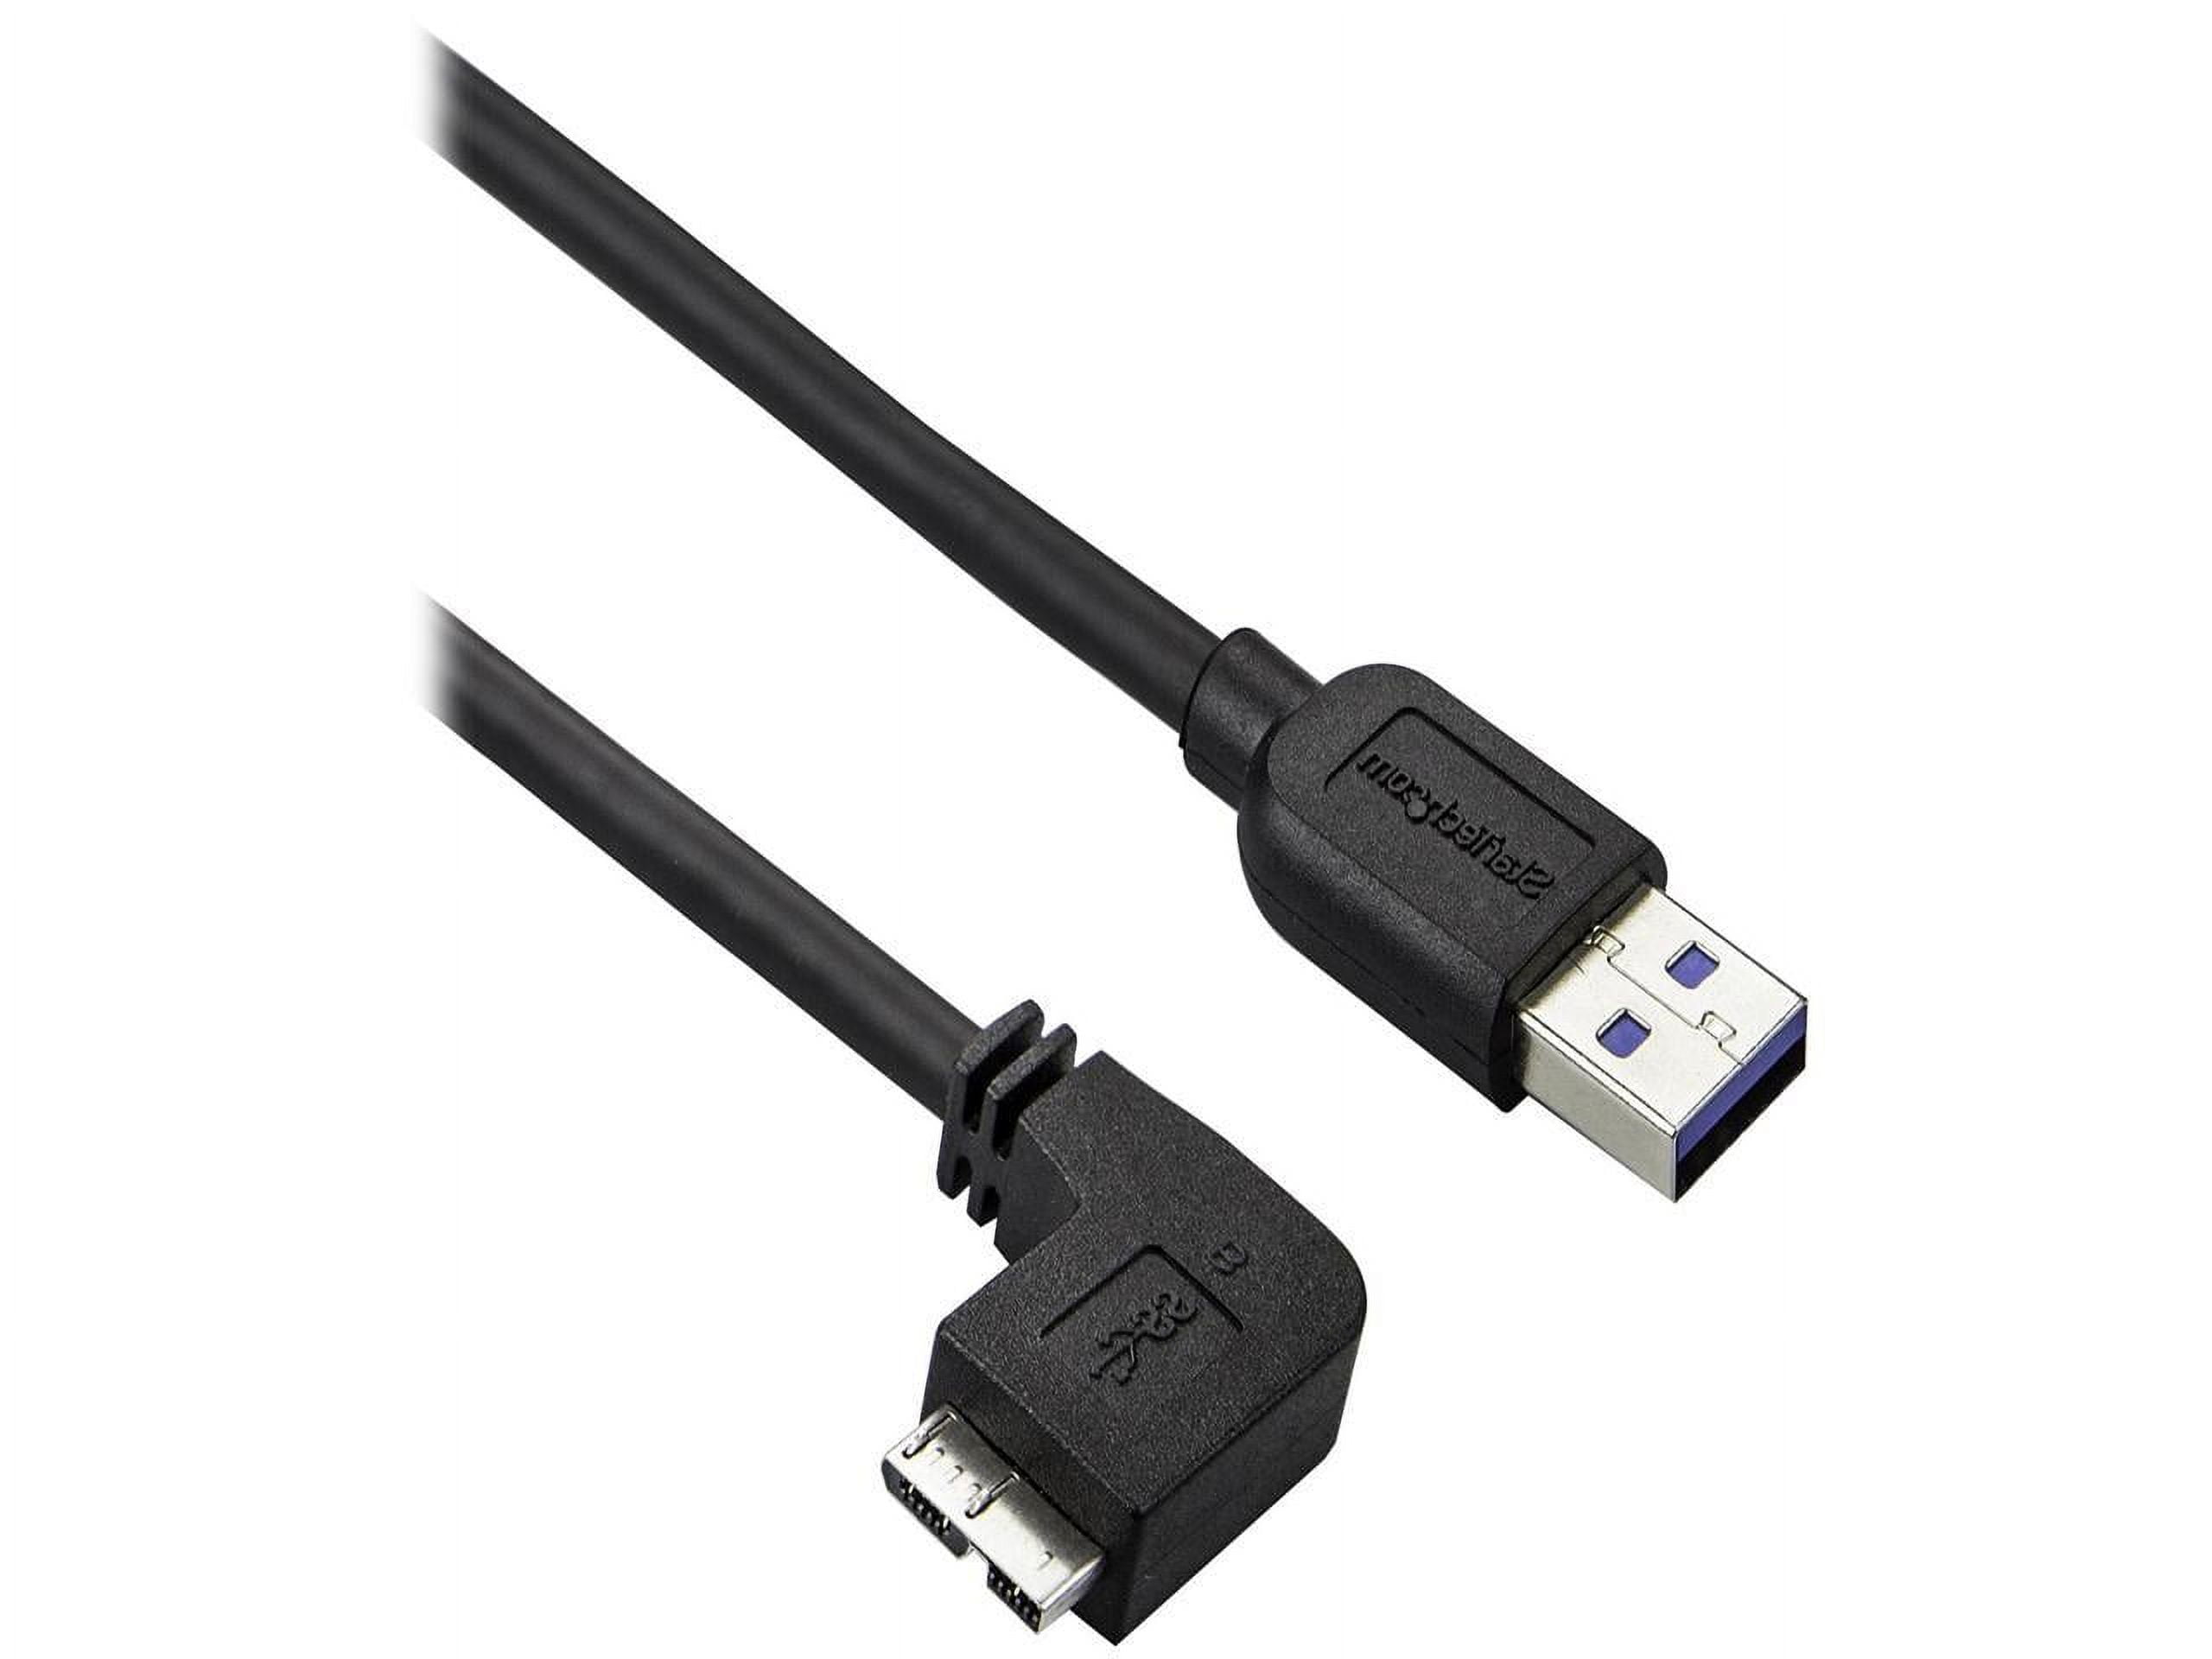 0.5m 1.5ft Black USB 3.0 Micro B Cable - USB 3.0 Cables, Cables